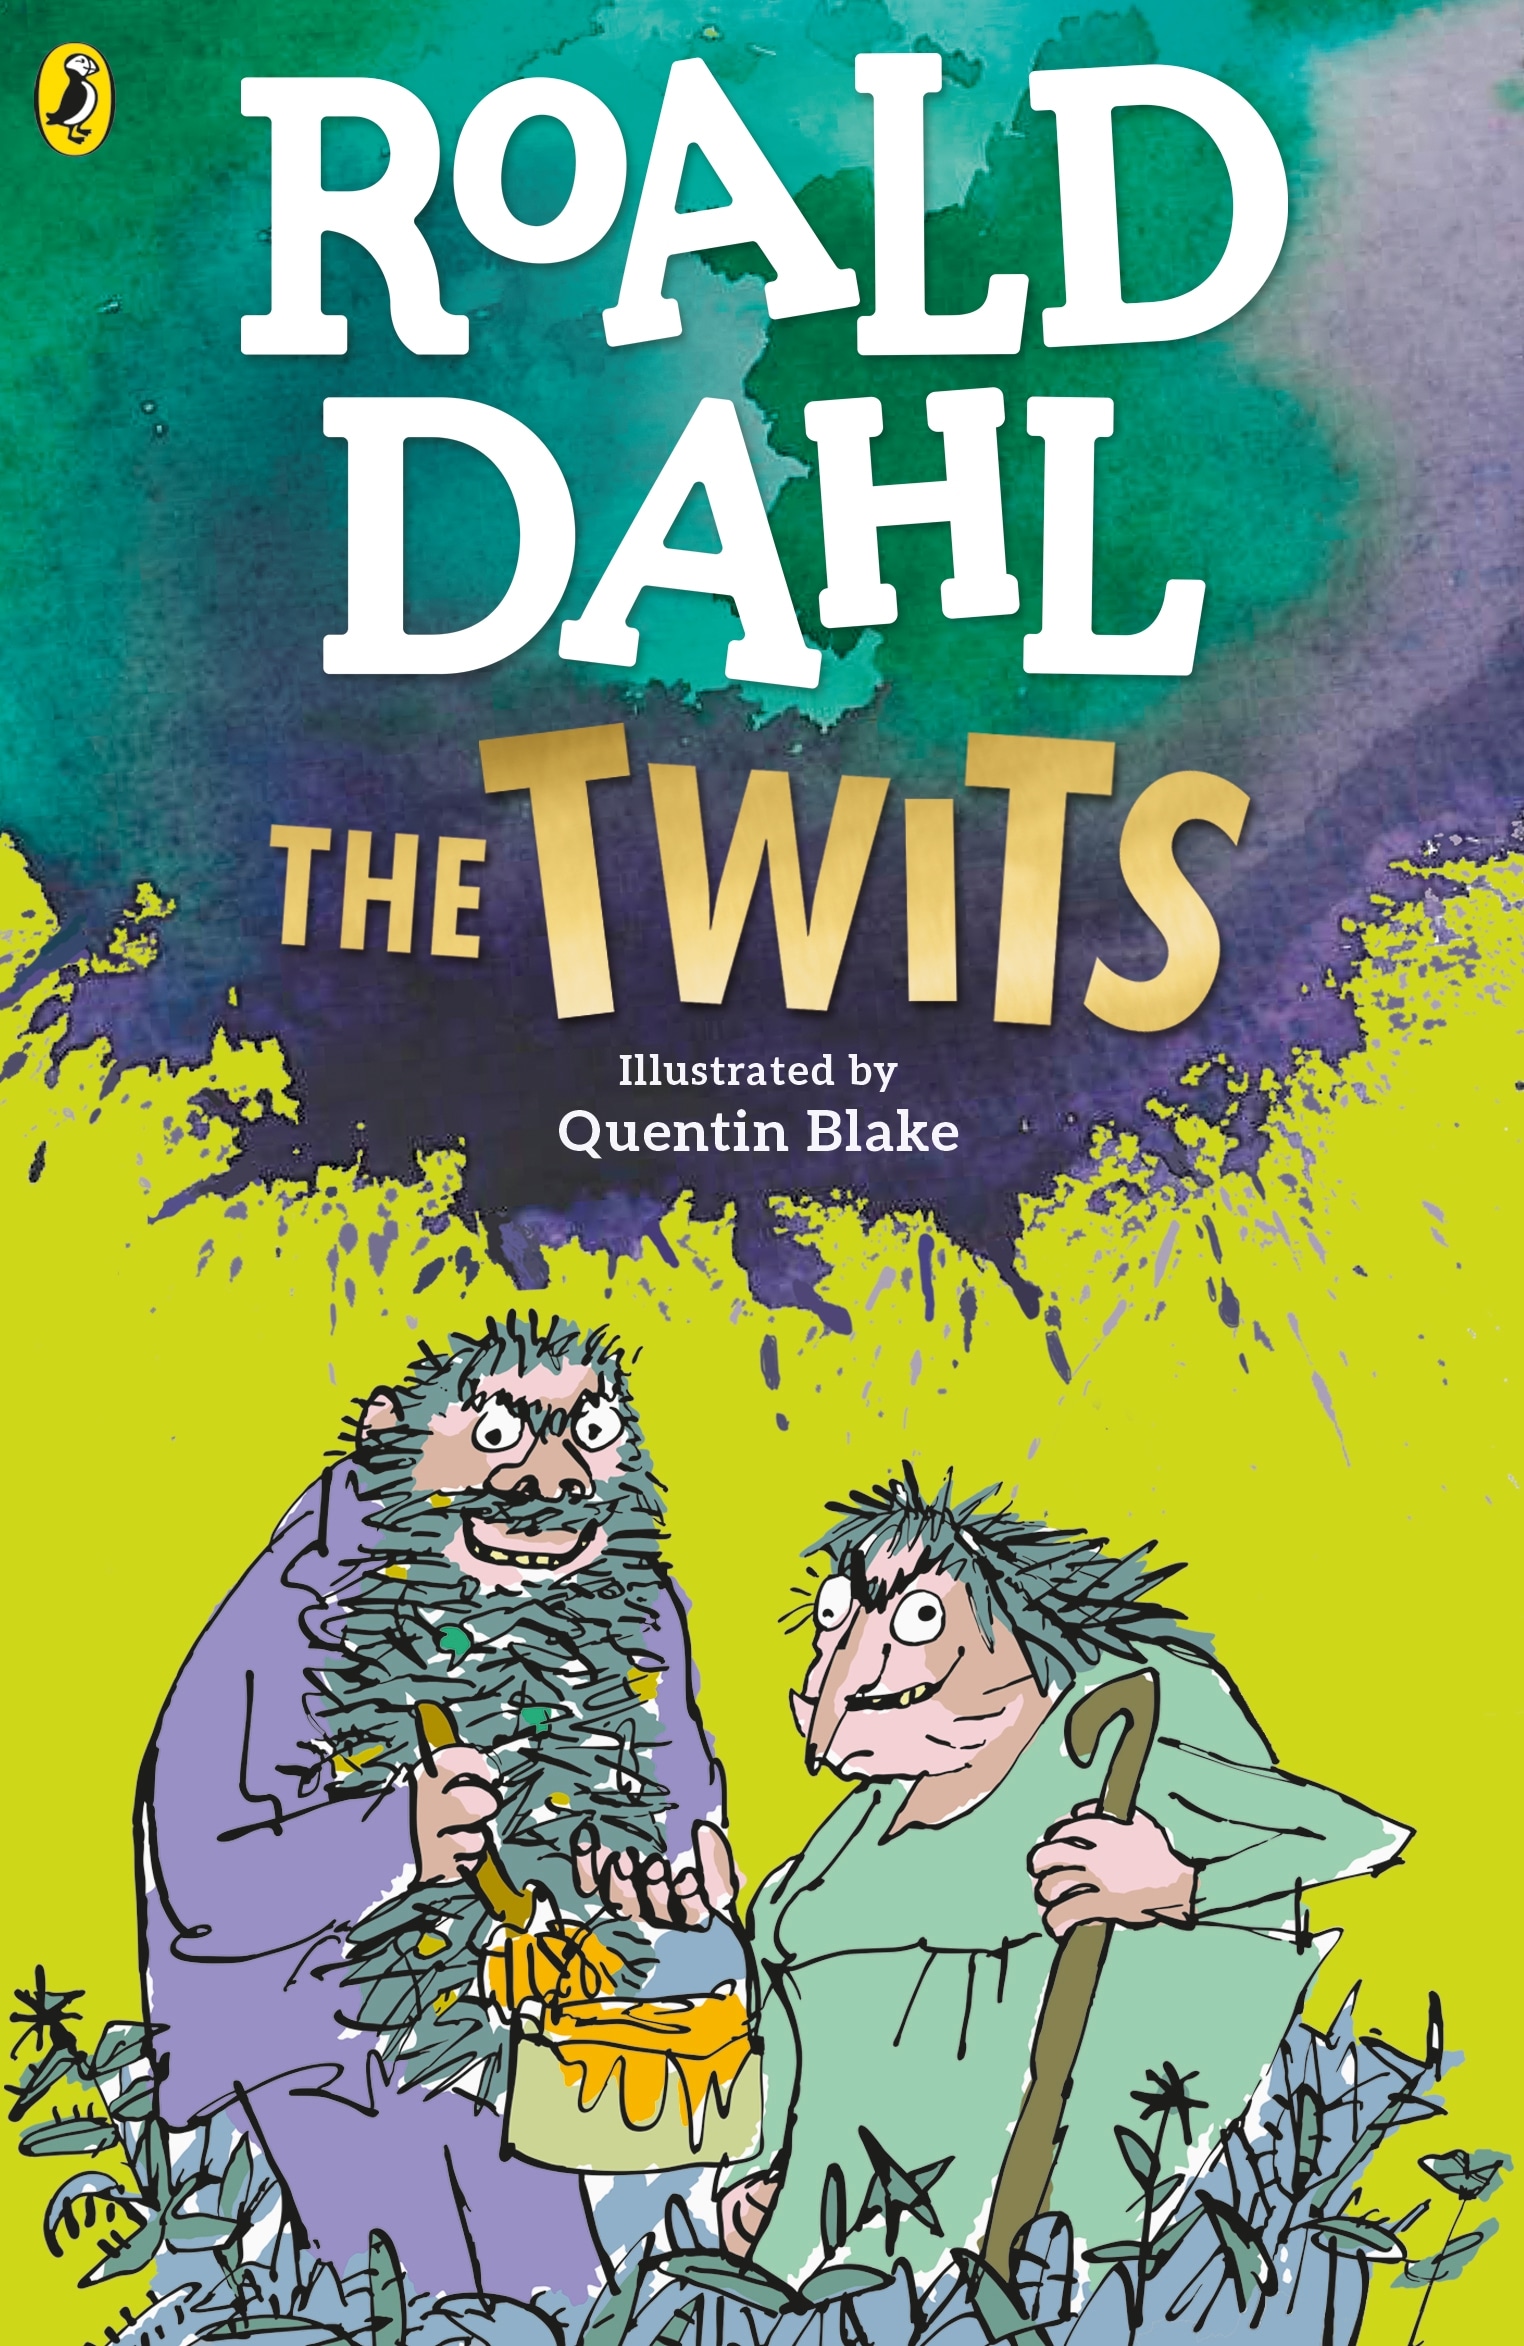 Book “The Twits” by Roald Dahl — July 21, 2022